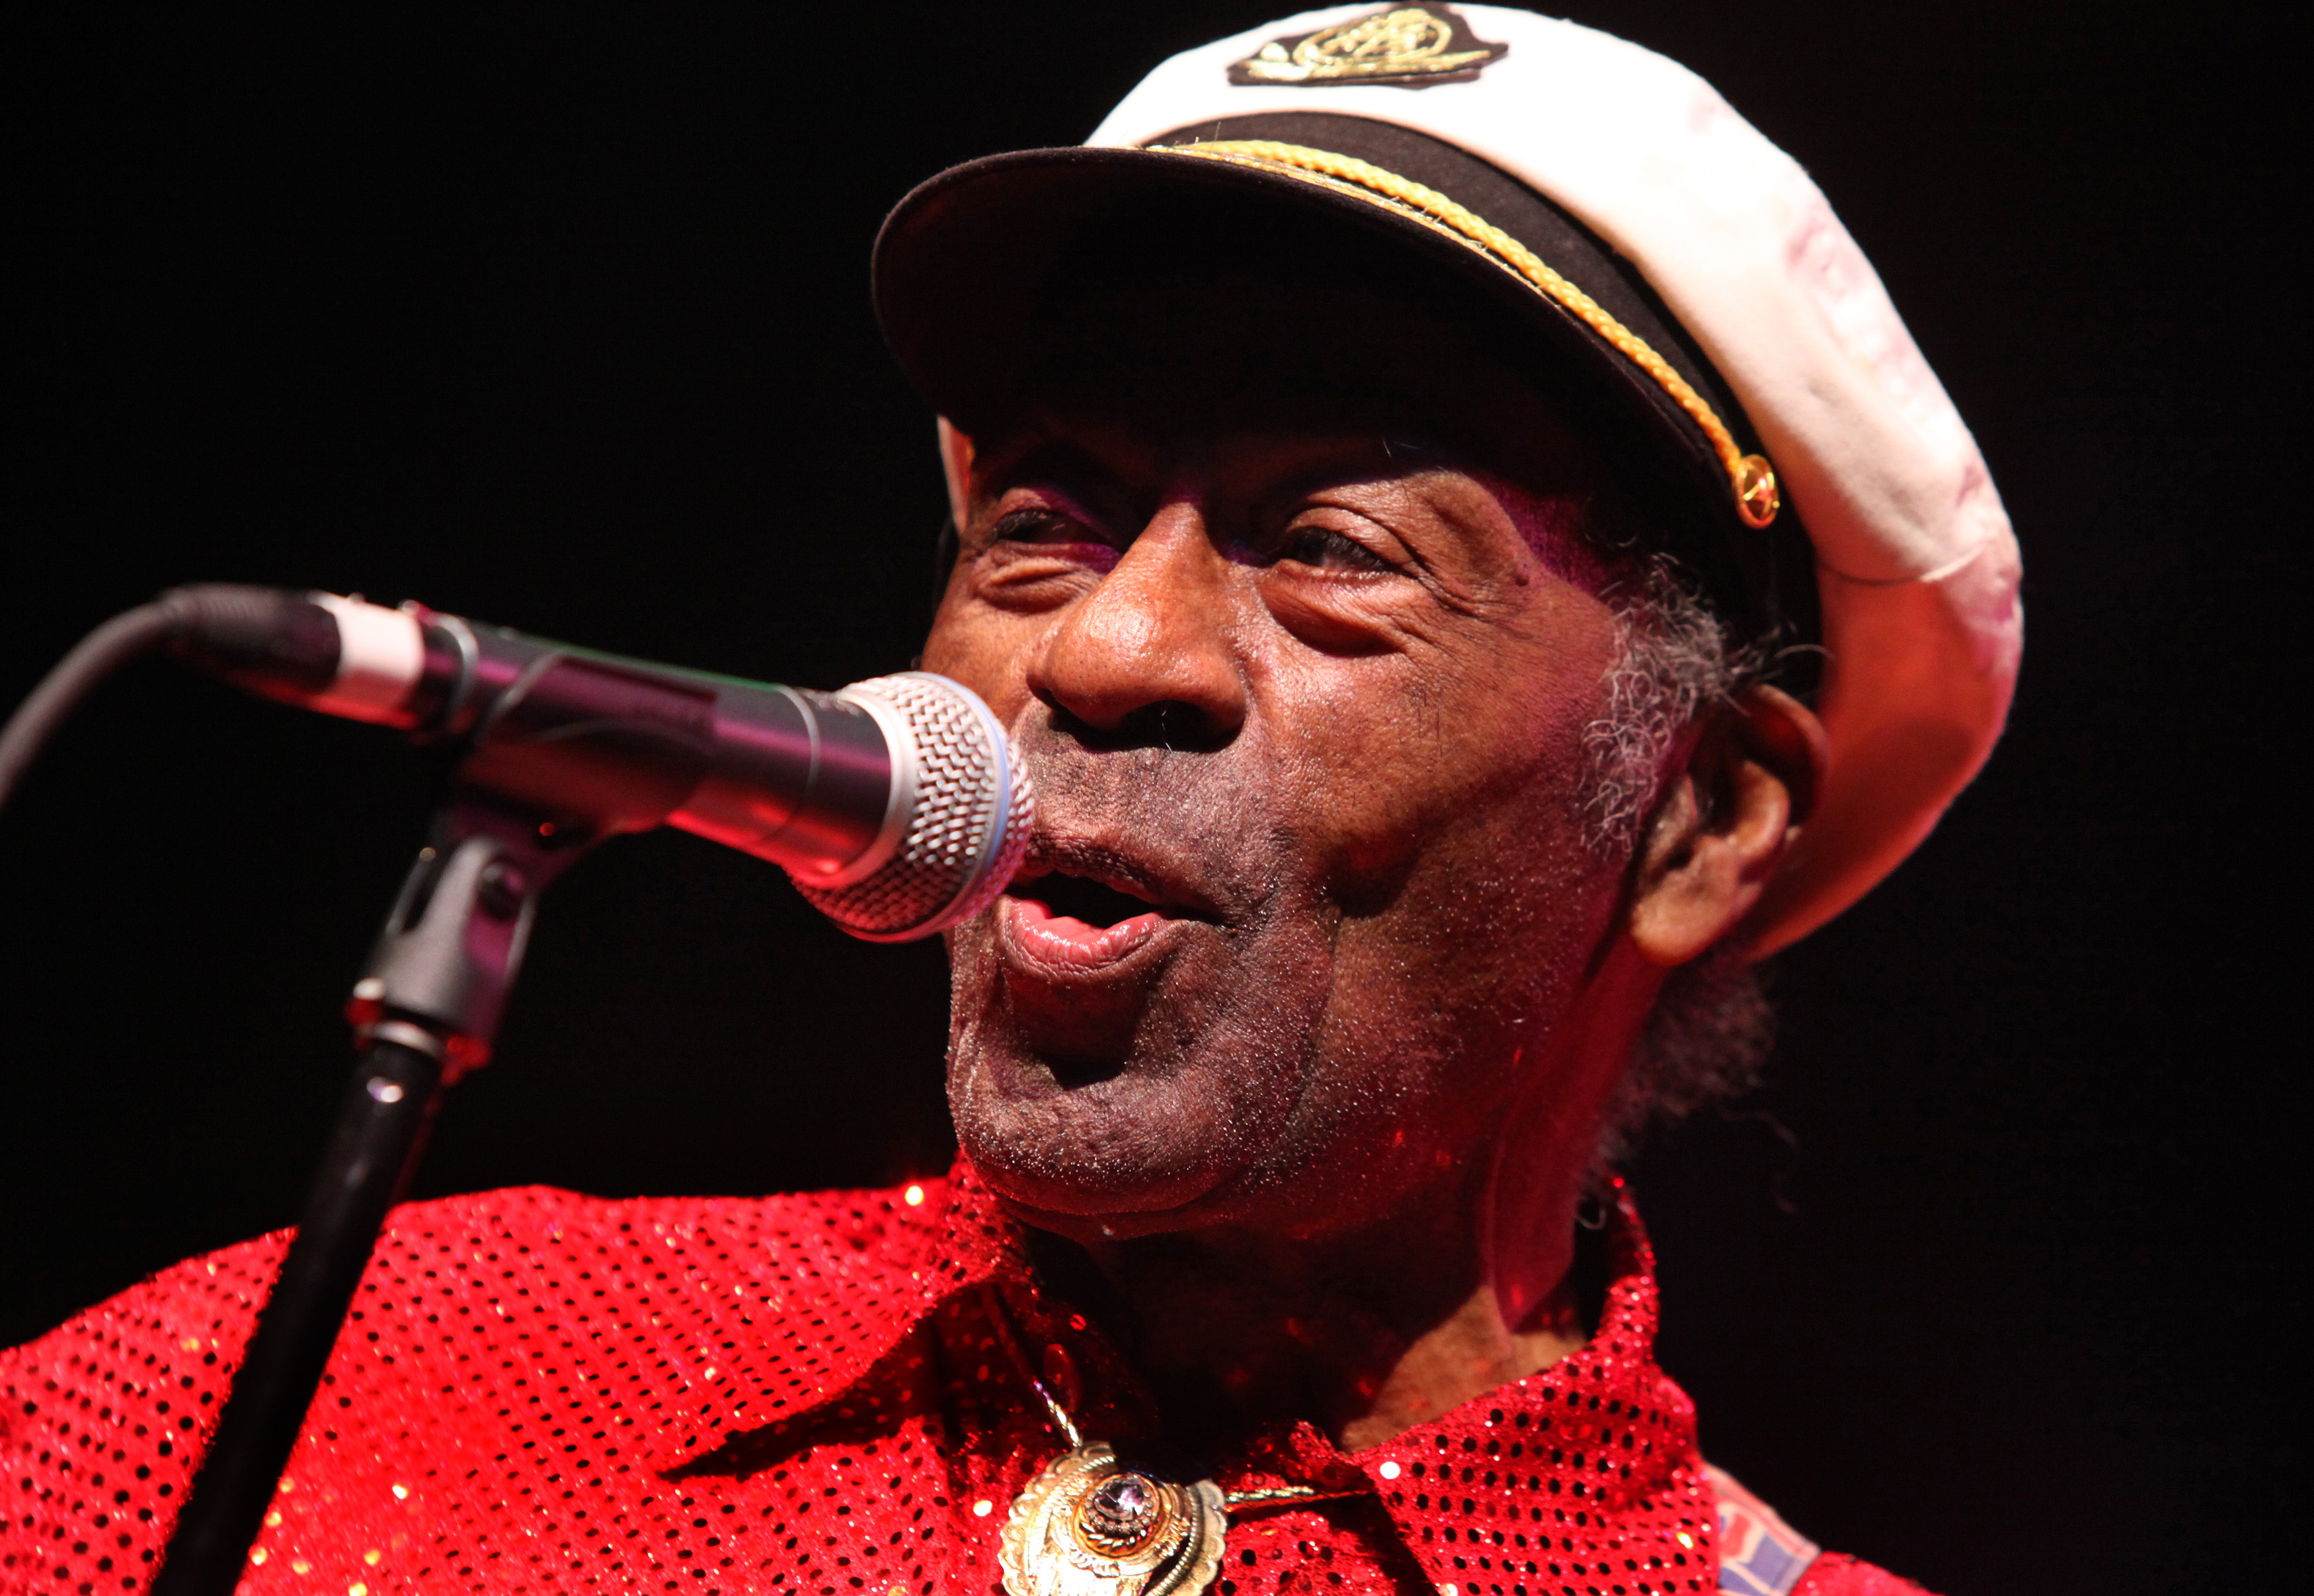 Chuck Berry performs at the Congress Theater on January 1, 2011 in Chicago, Illinois. (Barry Brecheisen/FilmMagic)